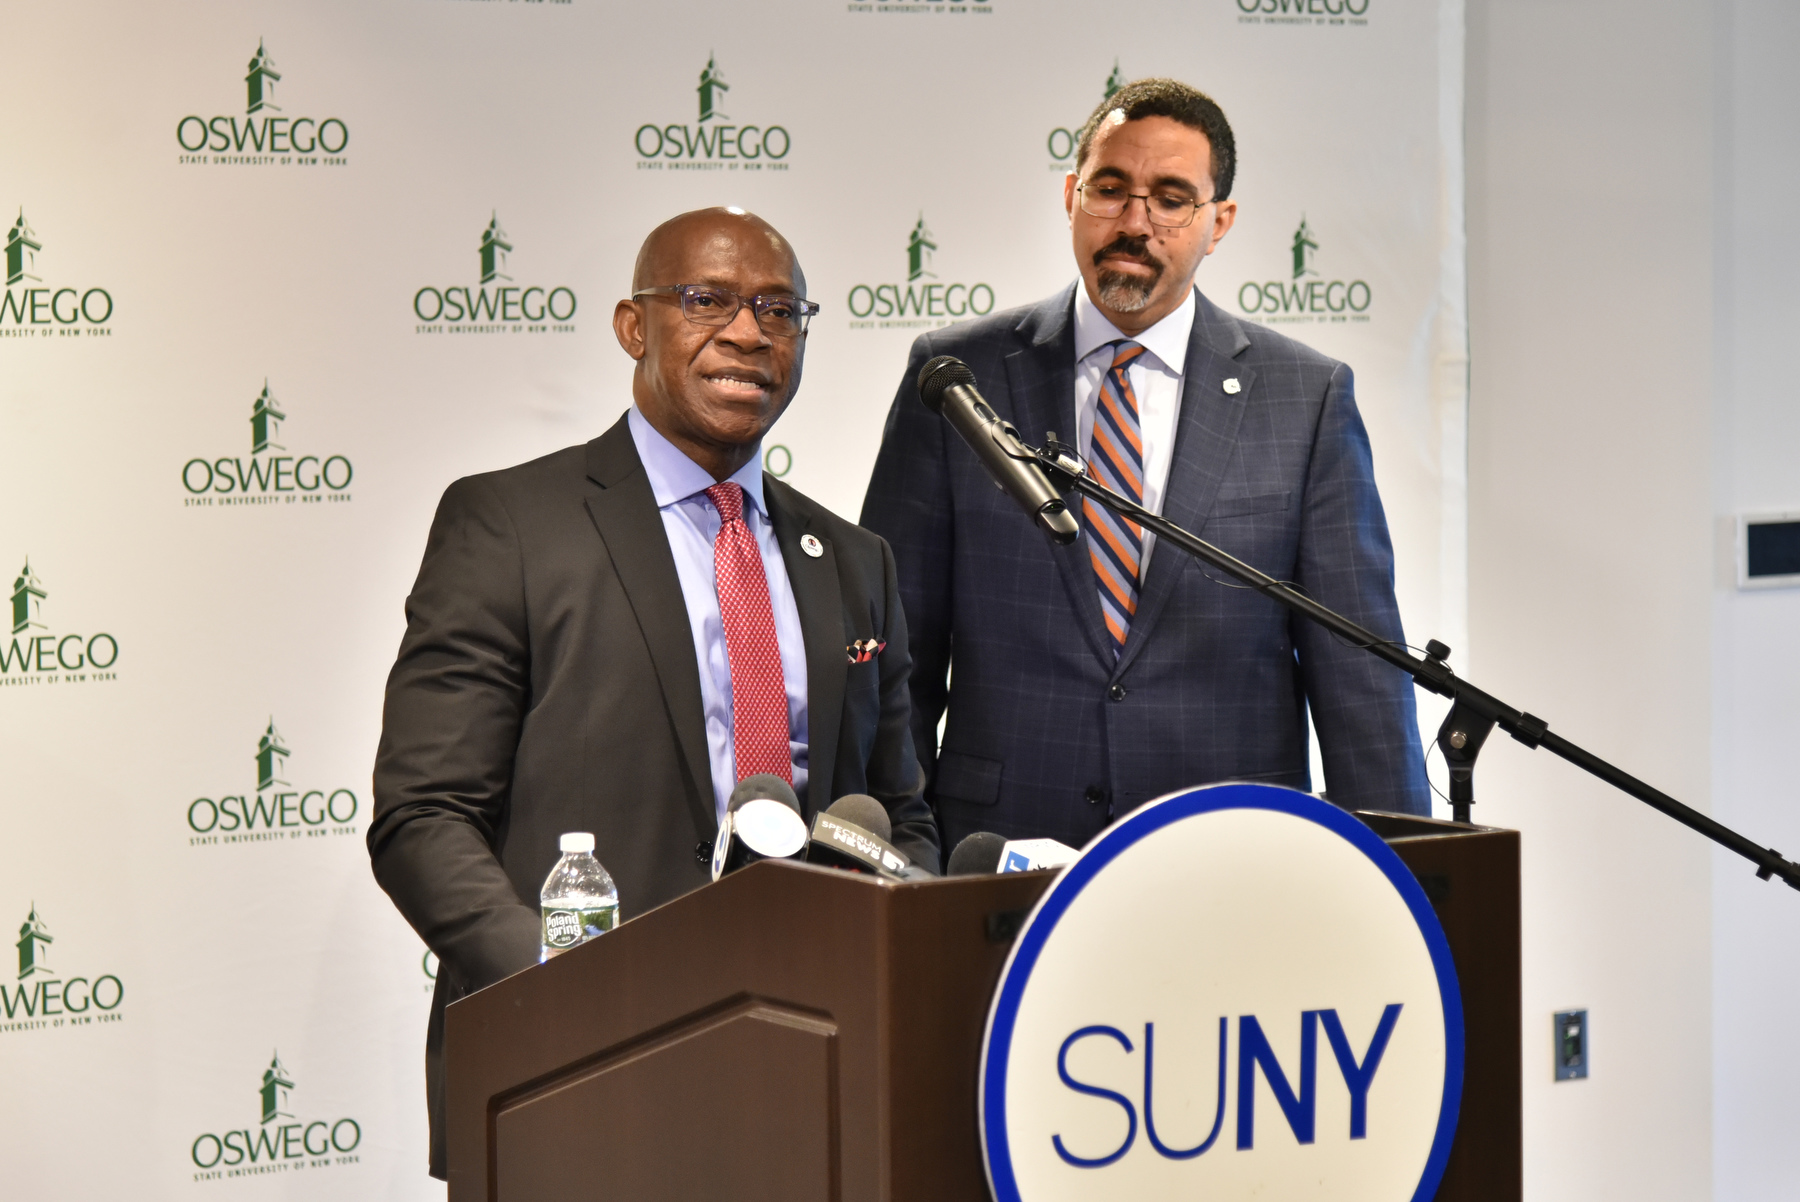 SUNY Chancellor John B. King Jr. visited SUNY Oswego Feb. 14 to meet with President Peter O. Nwosu and students, employees and several offices. President Nwosu is pictured introducing Chancellor King at a press conference in The Space in Marano Campus Center.